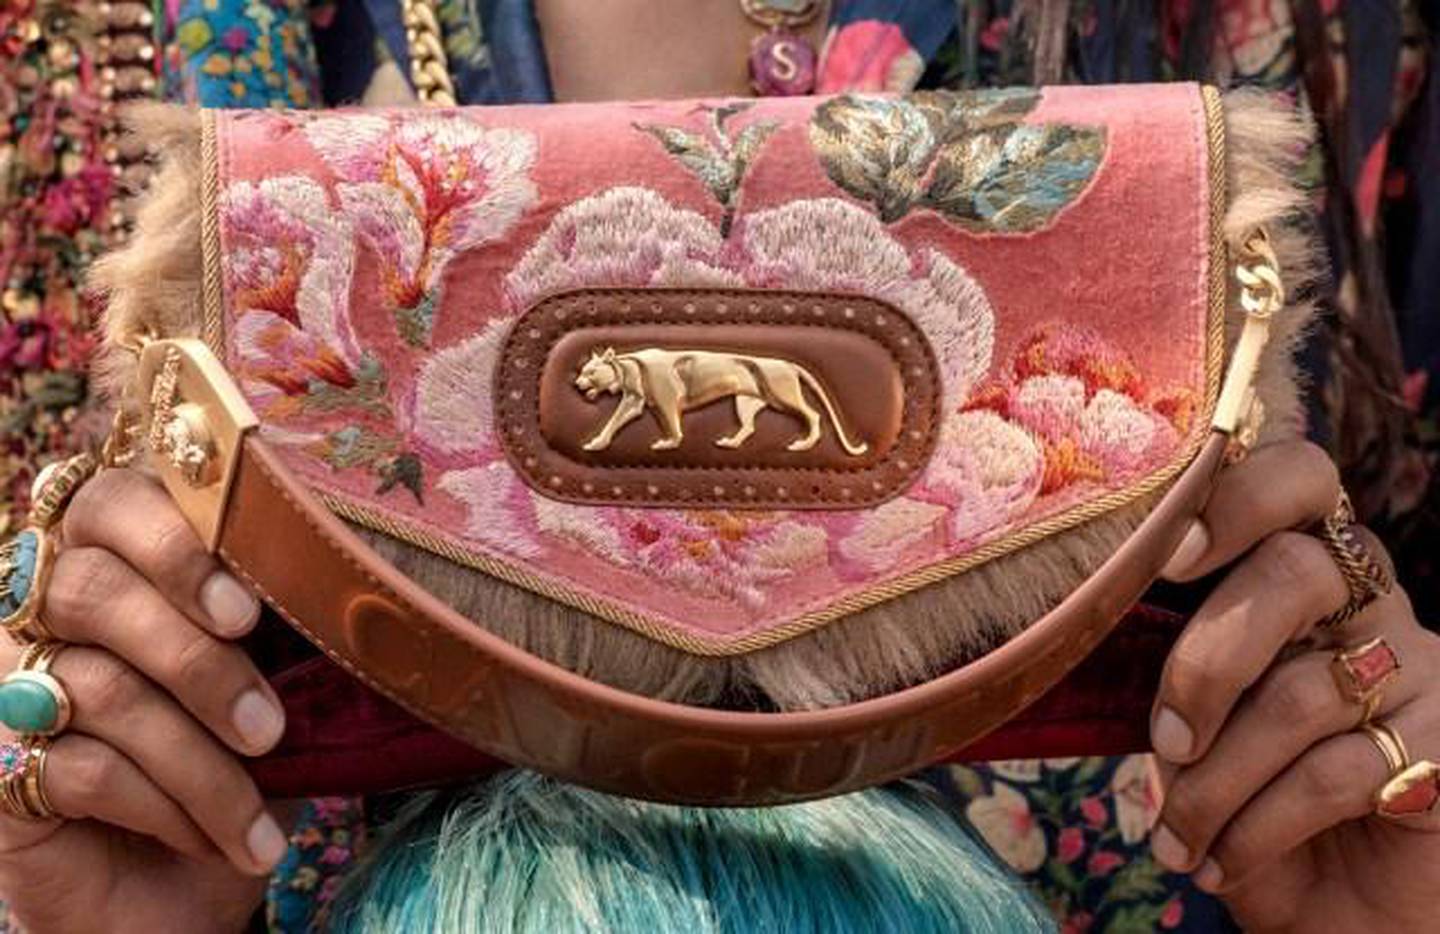 Sabyasachi will launch a new collection for Bergdorf Goodman, including bags. Courtesy Sabyasachi